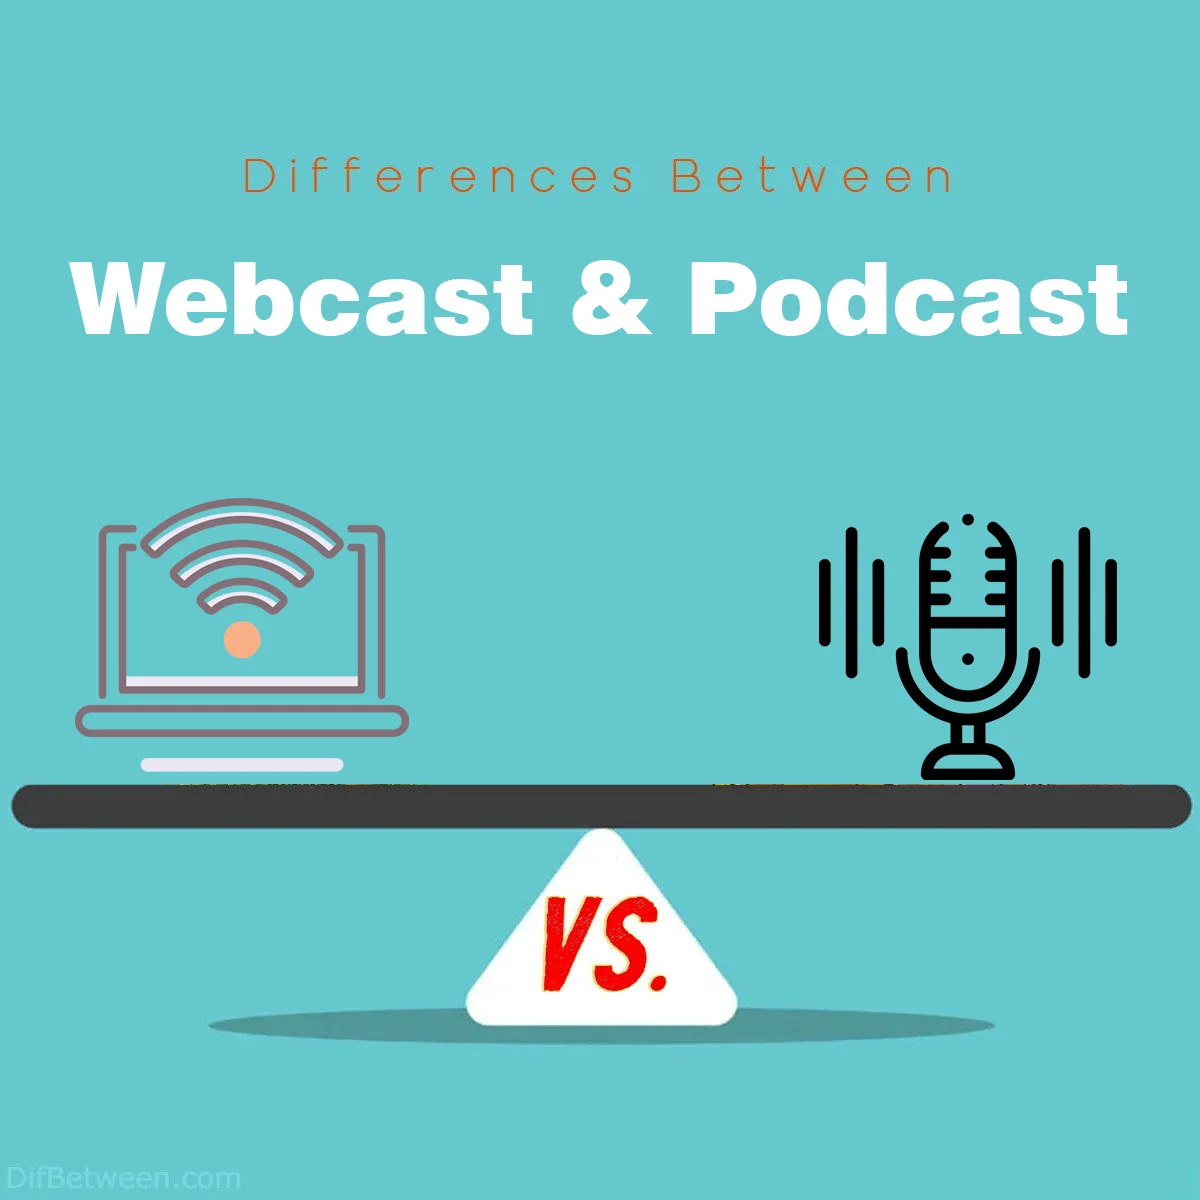 Differences Between Webcast and Podcast